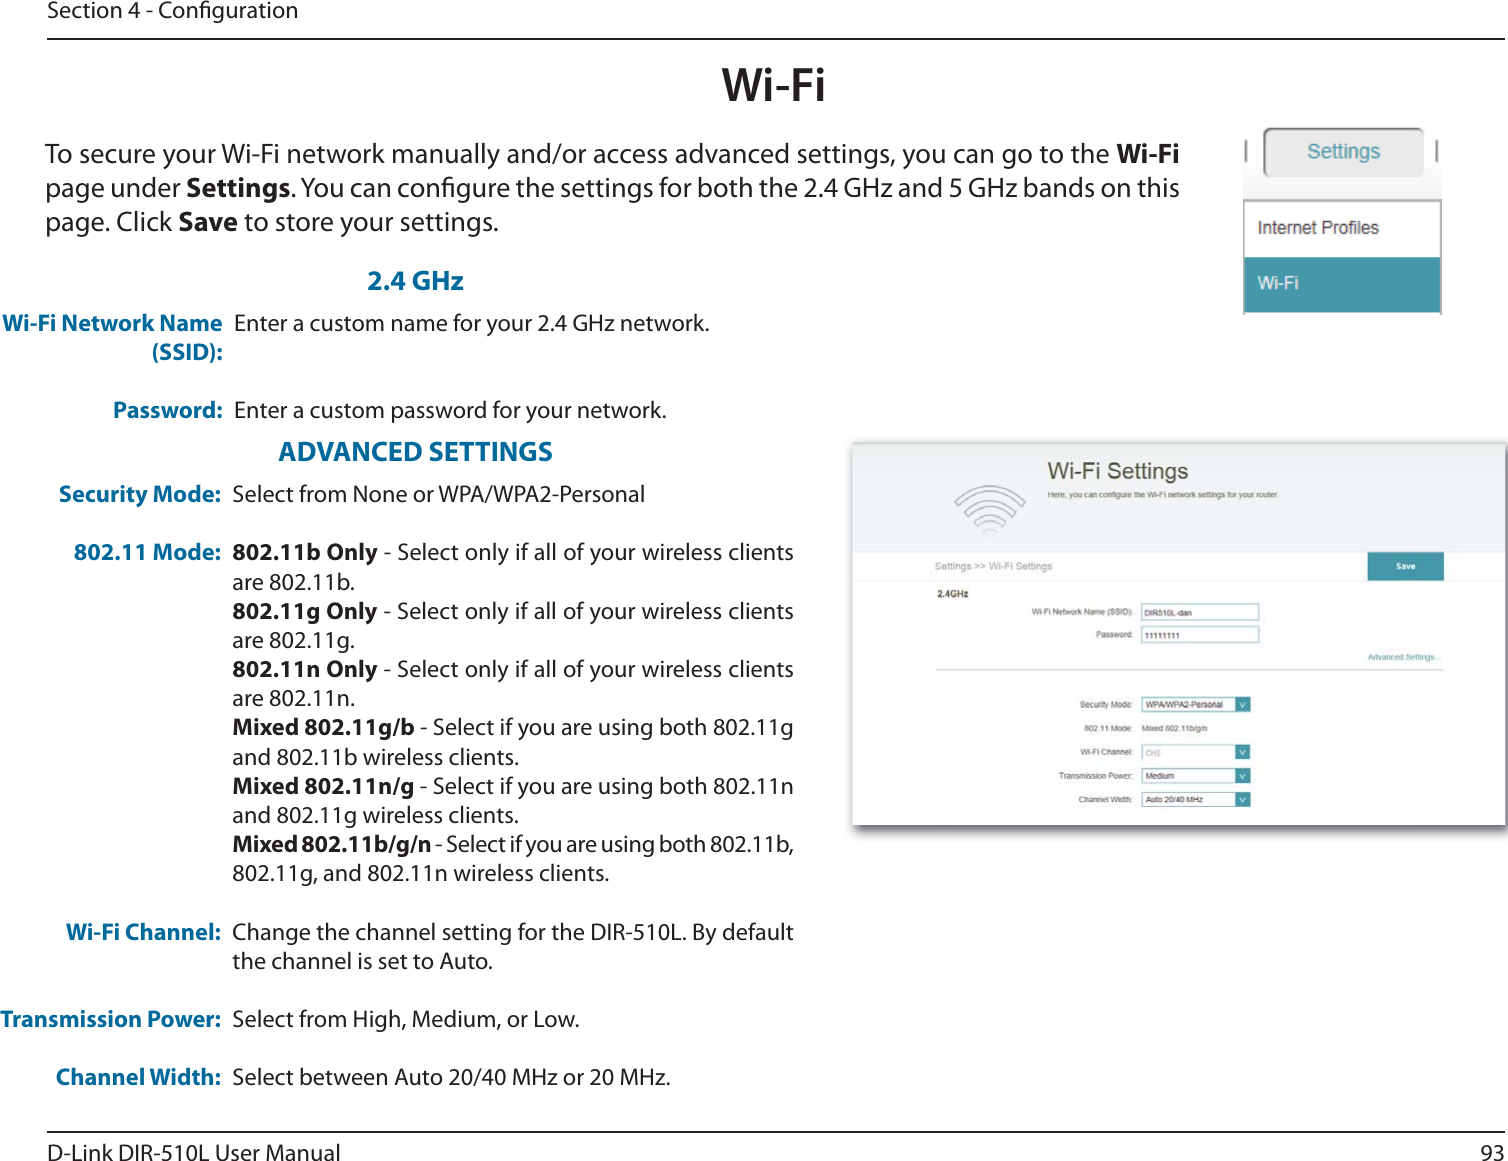 93D-Link DIR-510L User ManualSection 4 - CongurationWi-FiTo secure your Wi-Fi network manually and/or access advanced settings, you can go to the Wi-Fi page under Settings. You can congure the settings for both the 2.4 GHz and 5 GHz bands on this page. Click Save to store your settings.Wi-Fi Network Name (SSID):Password:Enter a custom name for your 2.4 GHz network.Enter a custom password for your network.Security Mode:802.11 Mode:Wi-Fi Channel:Transmission Power:Channel Width:Select from None or WPA/WPA2-Personal802.11b Only - Select only if all of your wireless clients are 802.11b.802.11g Only - Select only if all of your wireless clients are 802.11g.802.11n Only - Select only if all of your wireless clients are 802.11n.Mixed 802.11g/b - Select if you are using both 802.11g and 802.11b wireless clients.Mixed 802.11n/g - Select if you are using both 802.11n and 802.11g wireless clients.Mixed 802.11b/g/n - Select if you are using both 802.11b, 802.11g, and 802.11n wireless clients.Change the channel setting for the DIR-510L. By default the channel is set to Auto.Select from High, Medium, or Low.Select between Auto 20/40 MHz or 20 MHz.ADVANCED SETTINGS2.4 GHz